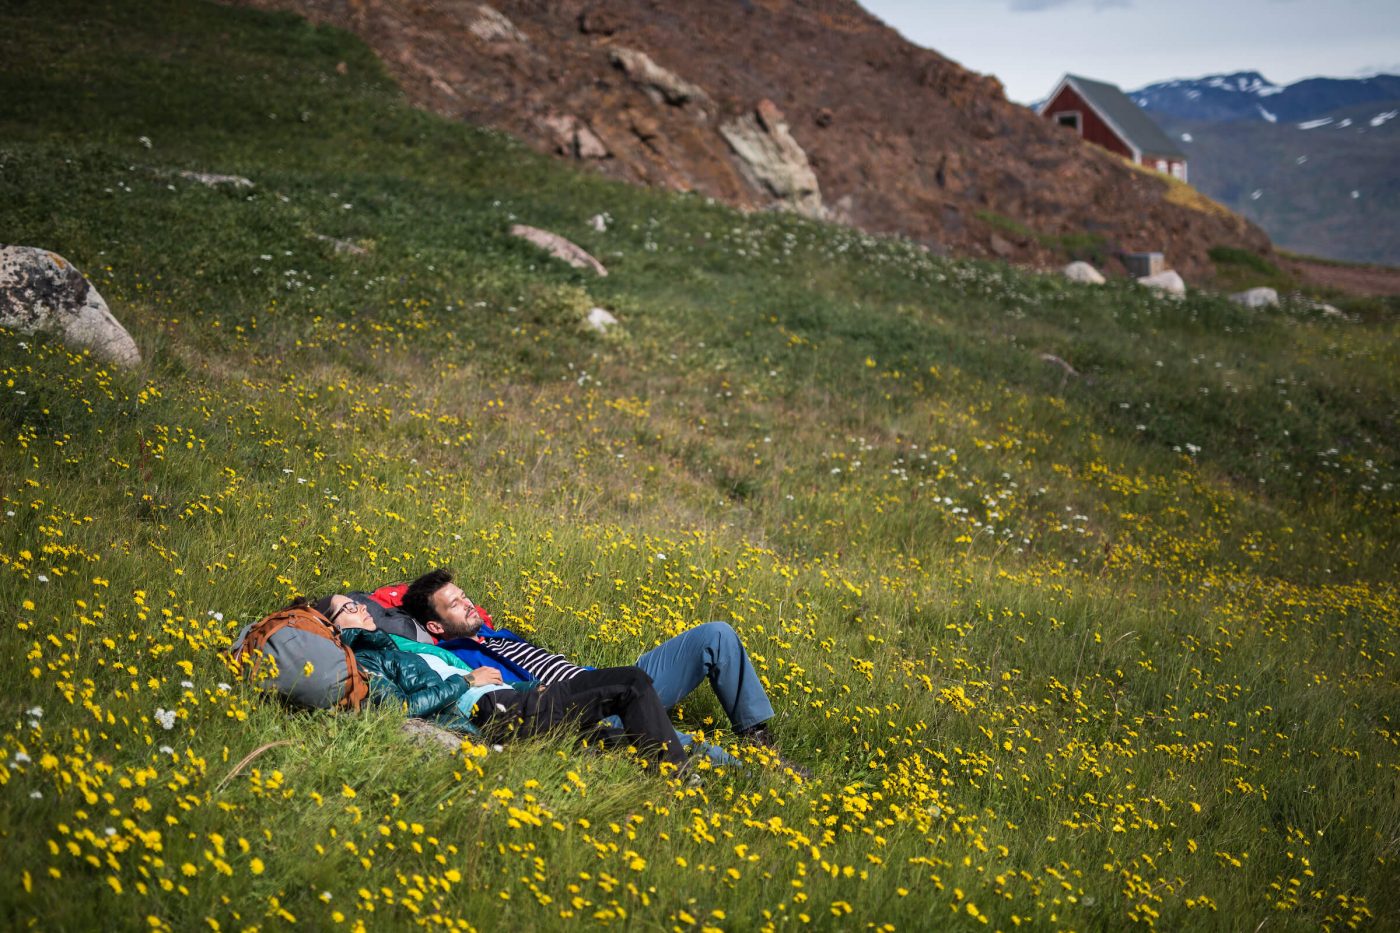 Hikers relaxing in a field of flowers in Qassiarsuk. The 5 most boring places in Greenland